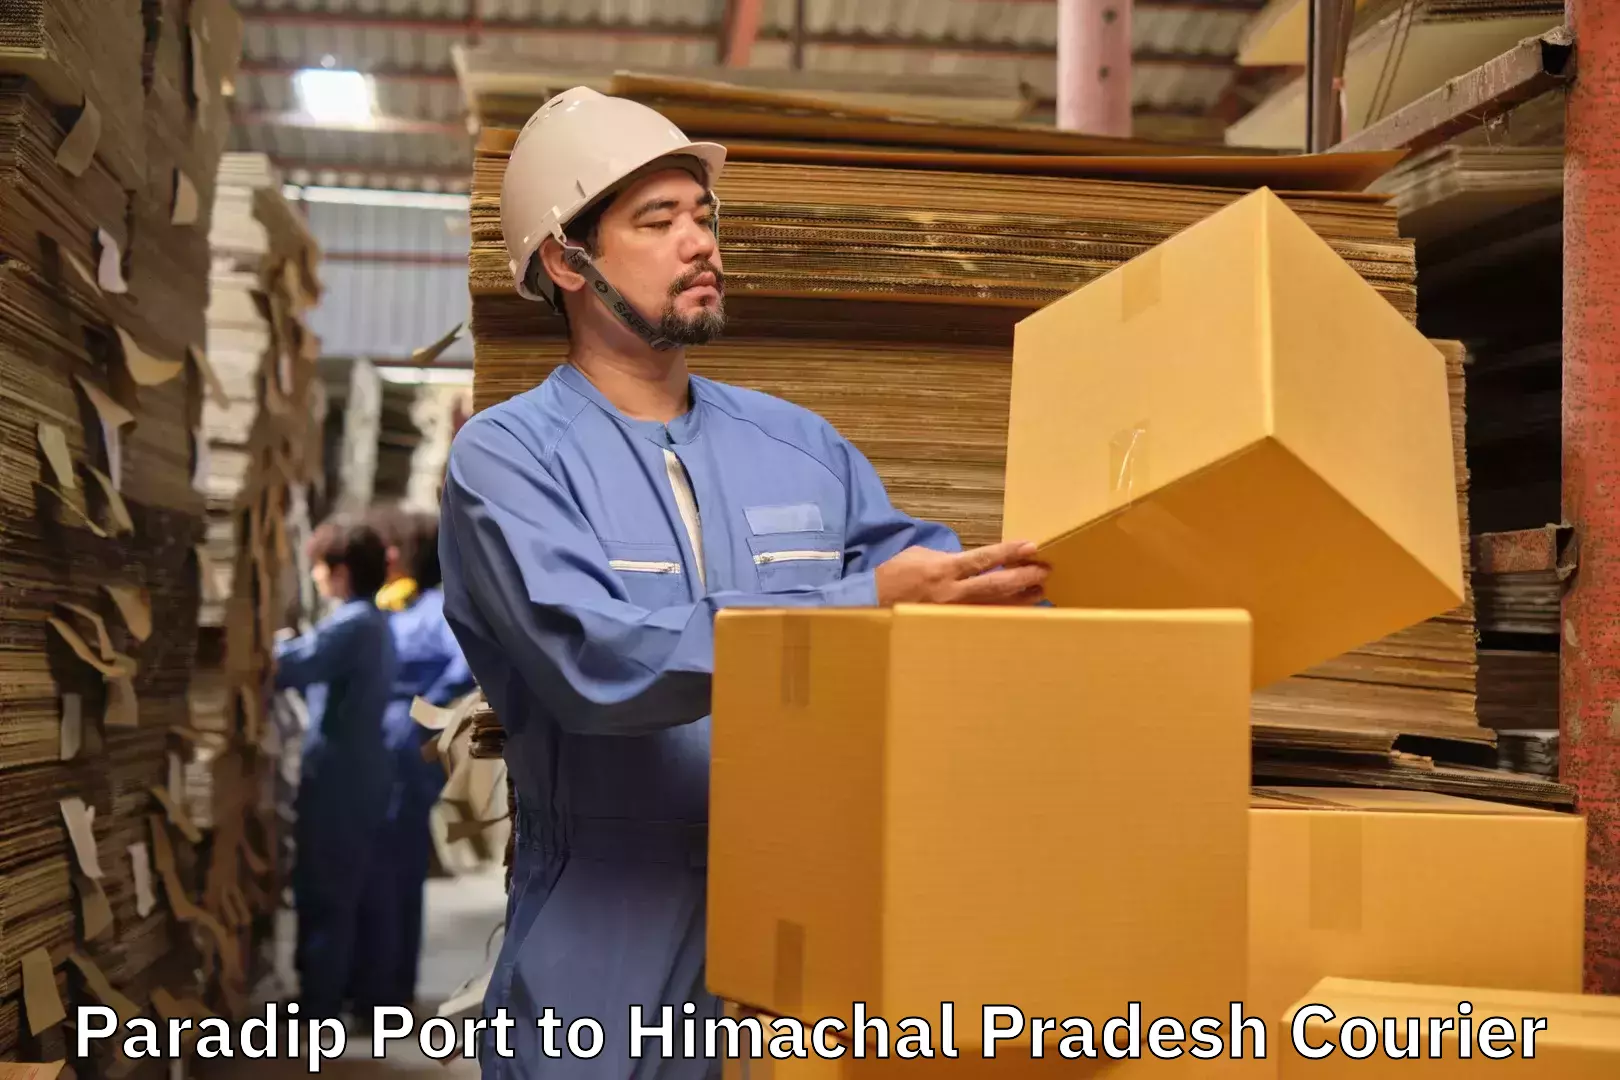 Luggage shipment specialists Paradip Port to Bharari